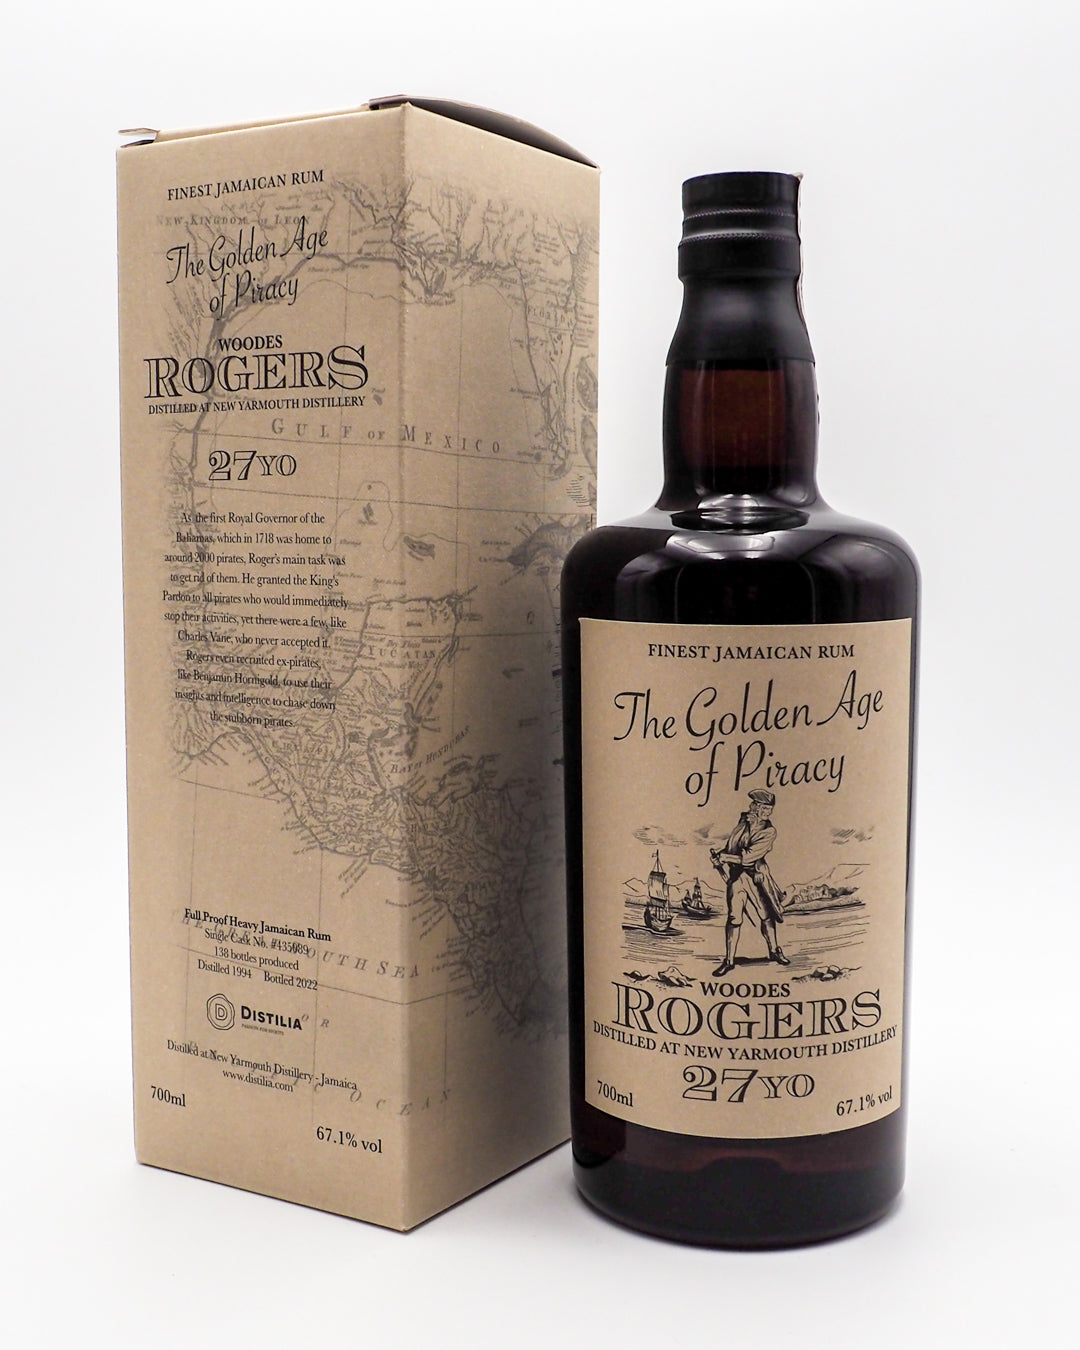 Rum Woodes Rogers 27yo - The Golden Age of Piracy